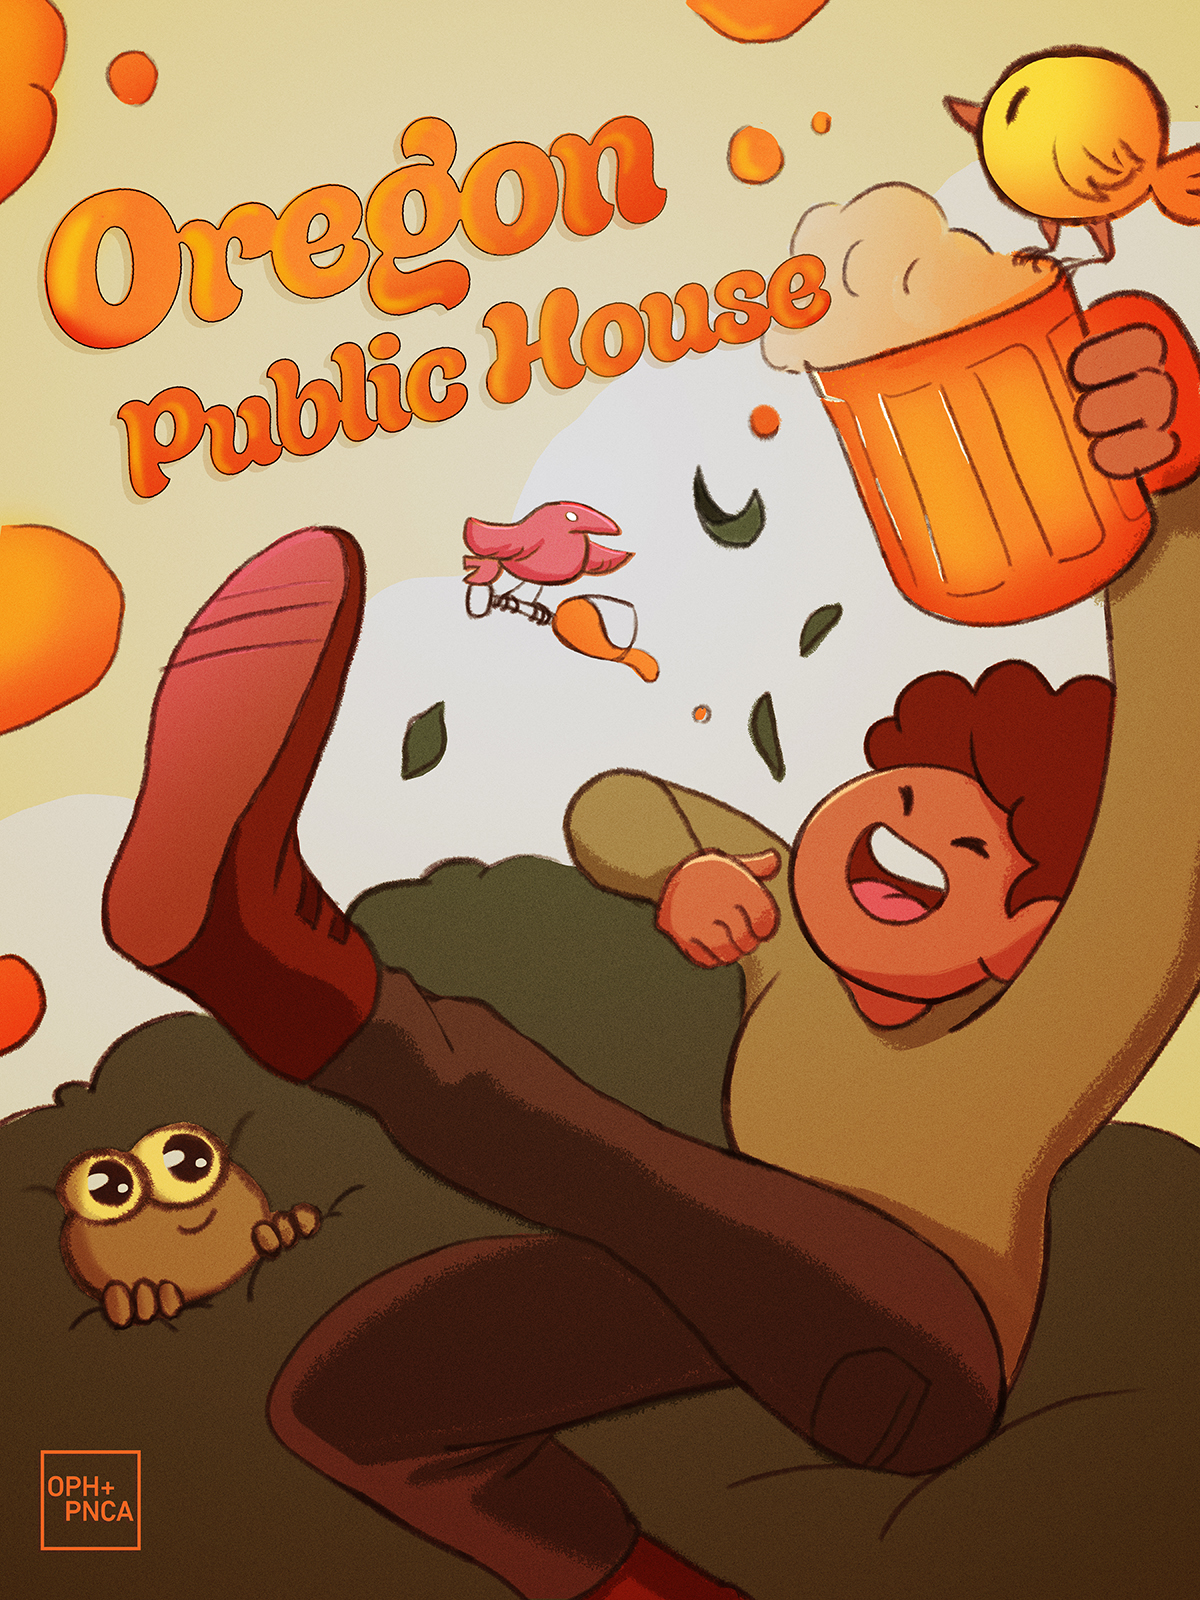 Illustrated poster design for 'Oregon Public House', graphic style illustration of a man kicking leg expressively while hold a large beer mug up to the sky